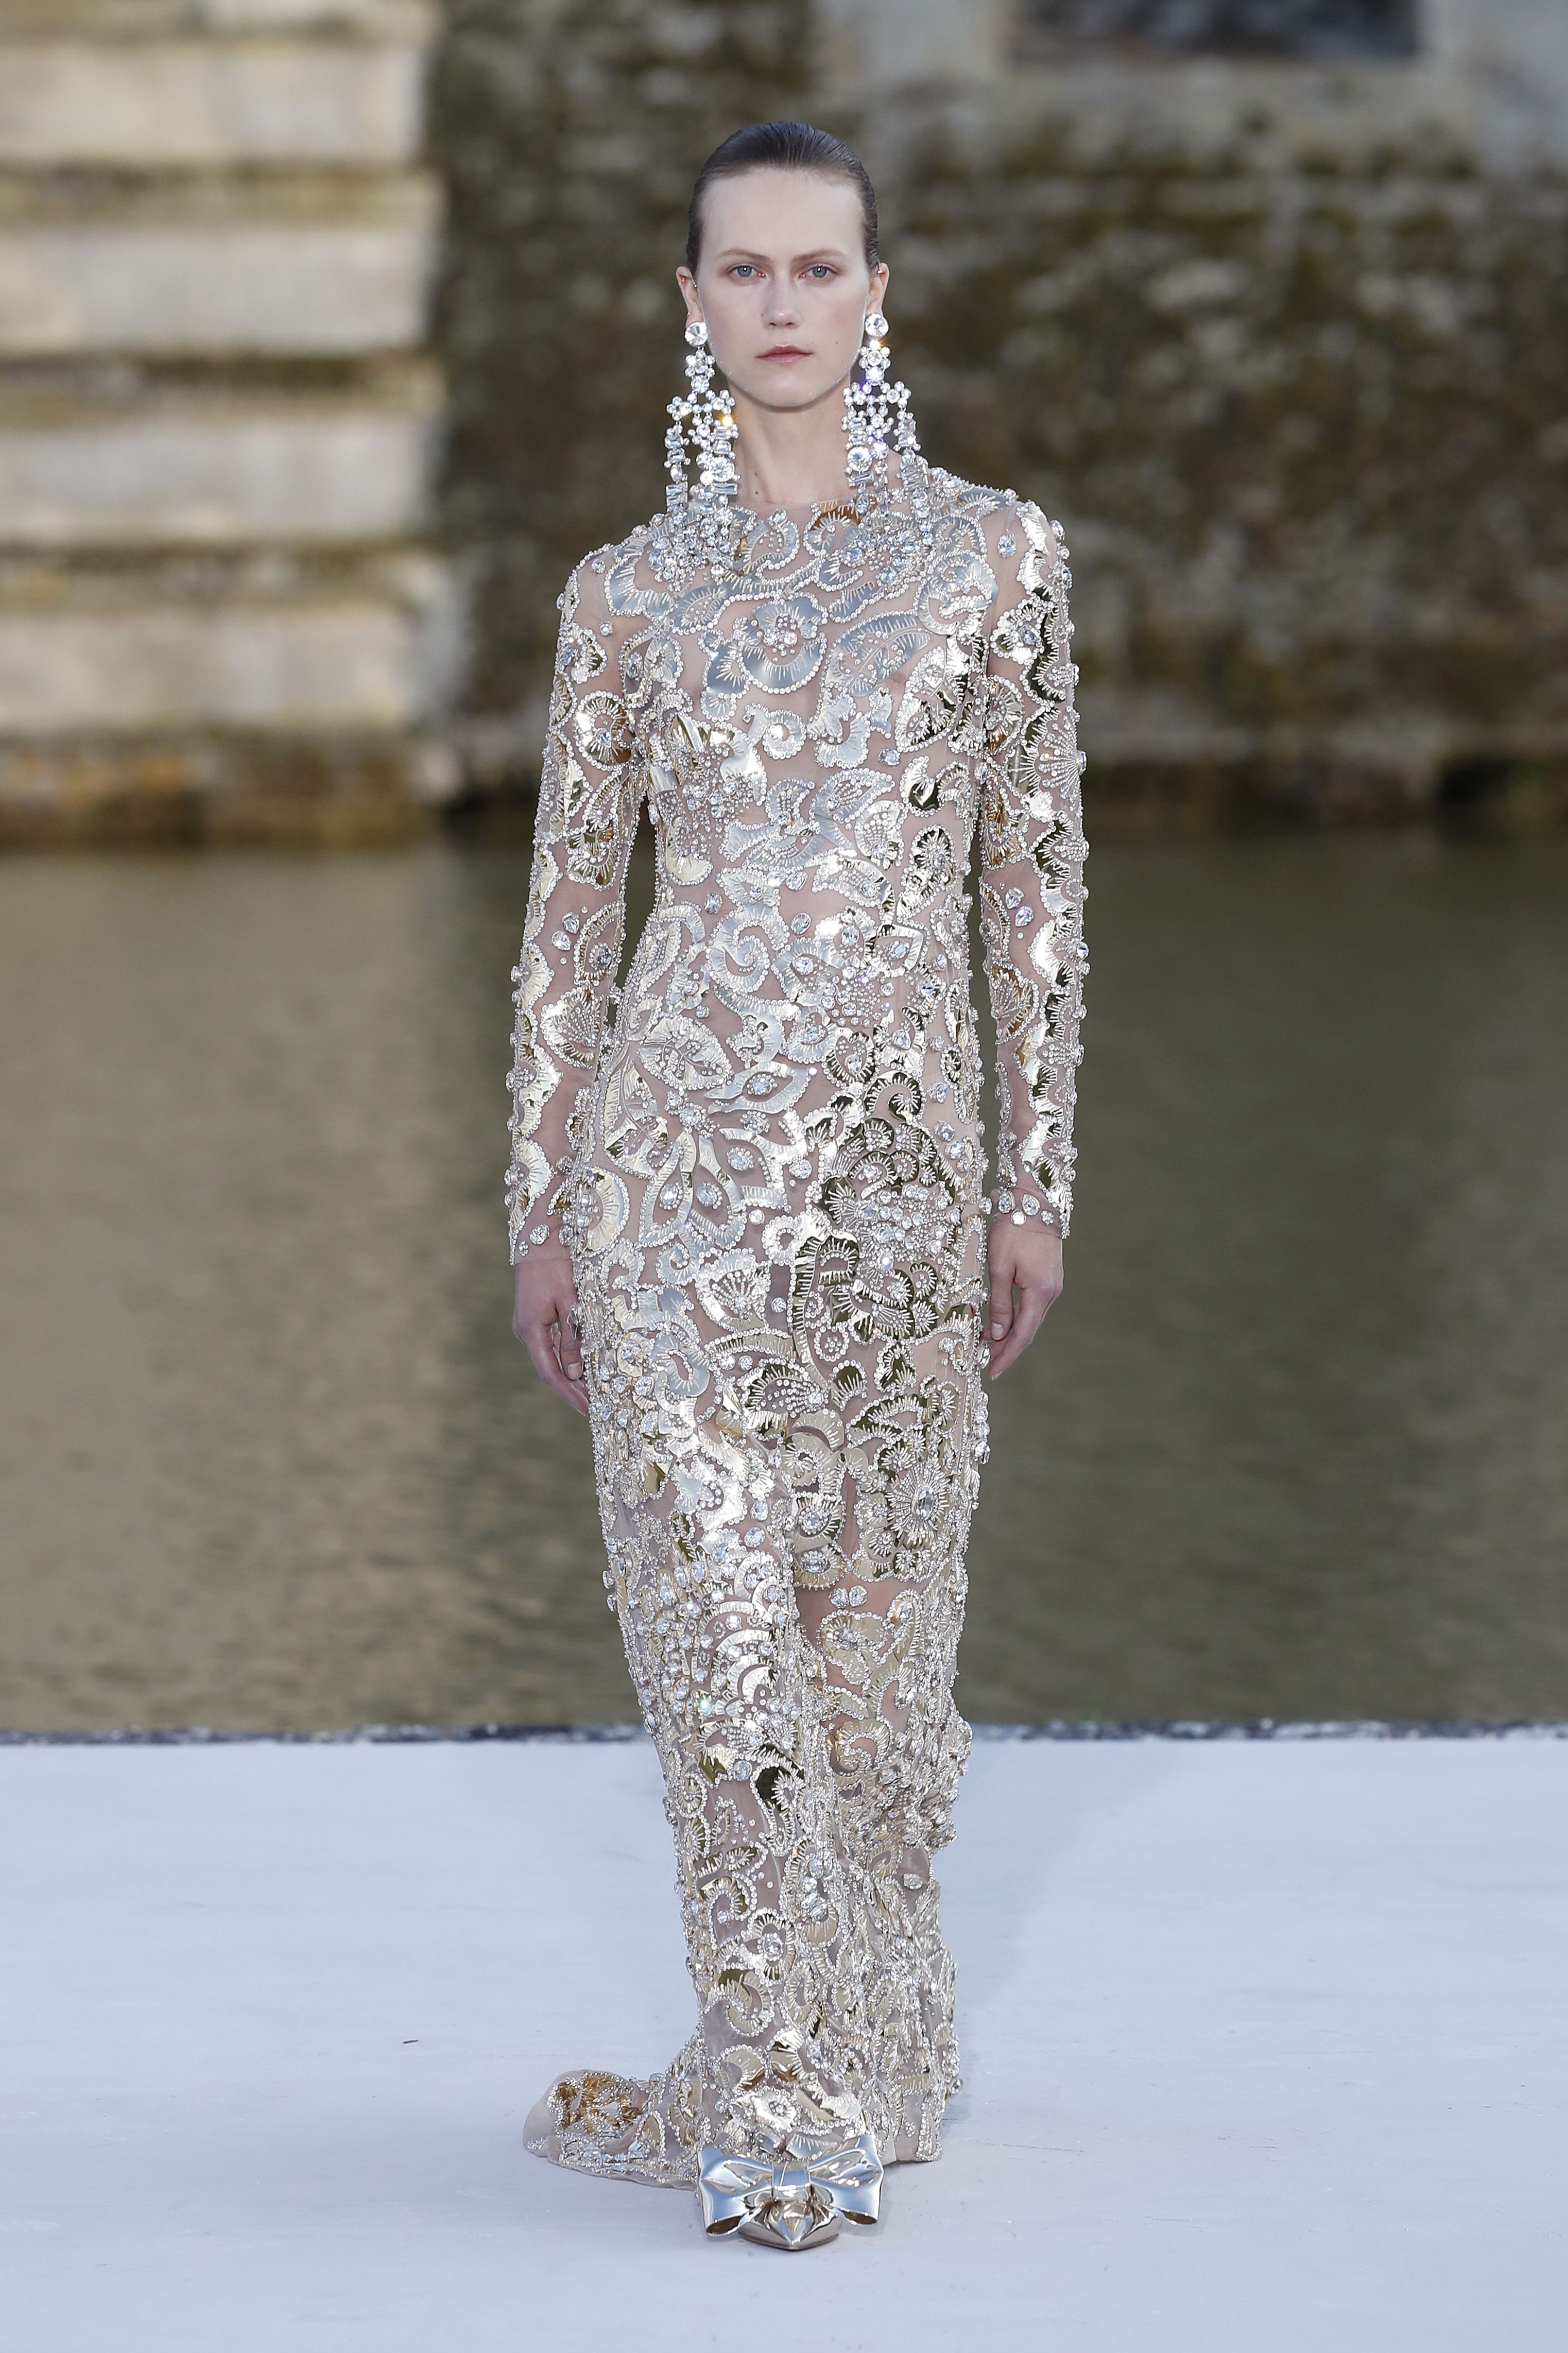 Chanel nods to sovereign style with its latest Paris Couture Week